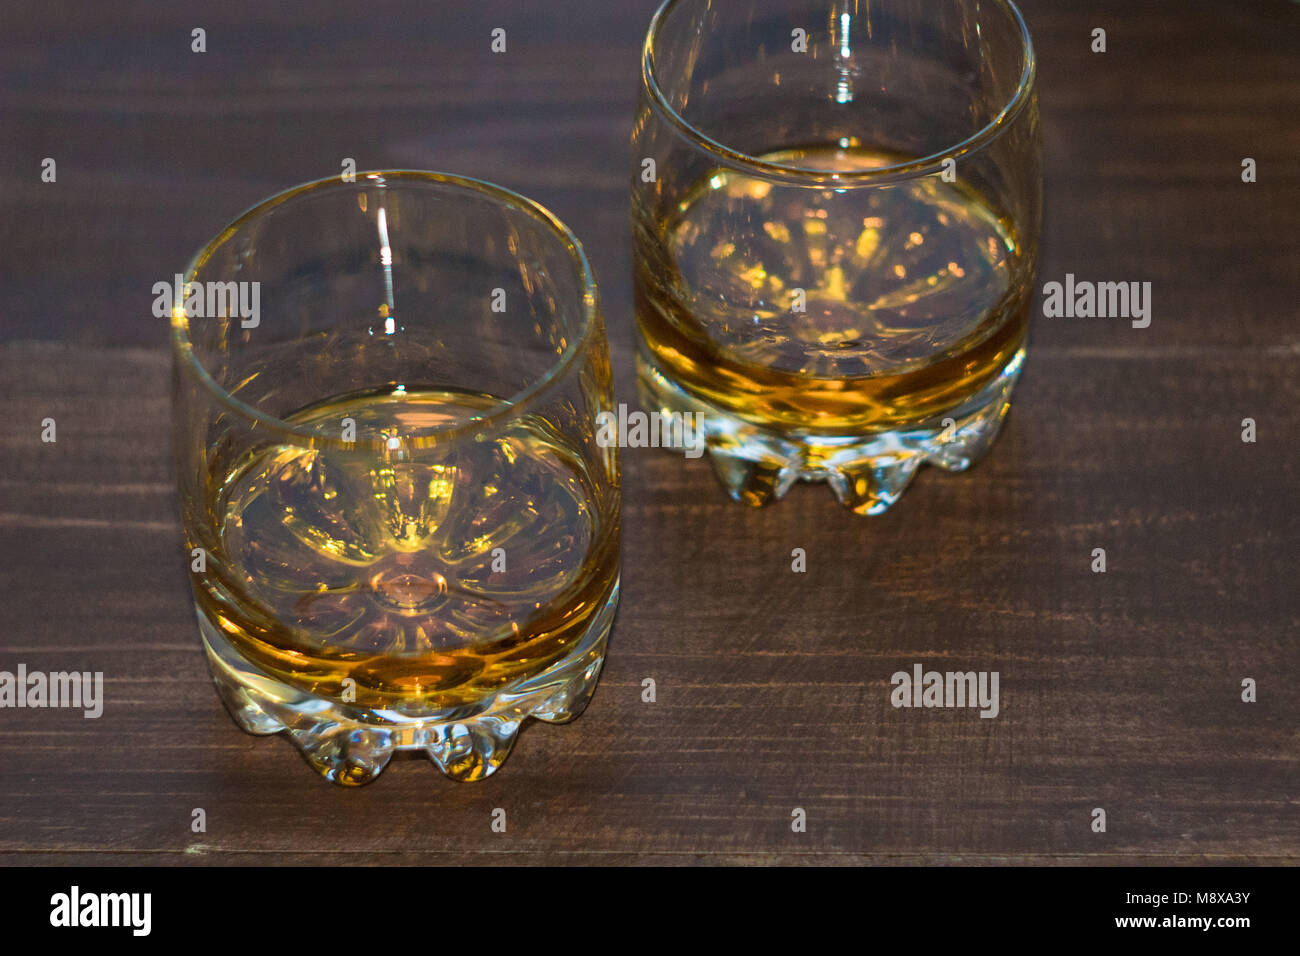 A glass of whiskey close-up. View at an angle. Whiskey without ice Stock Photo